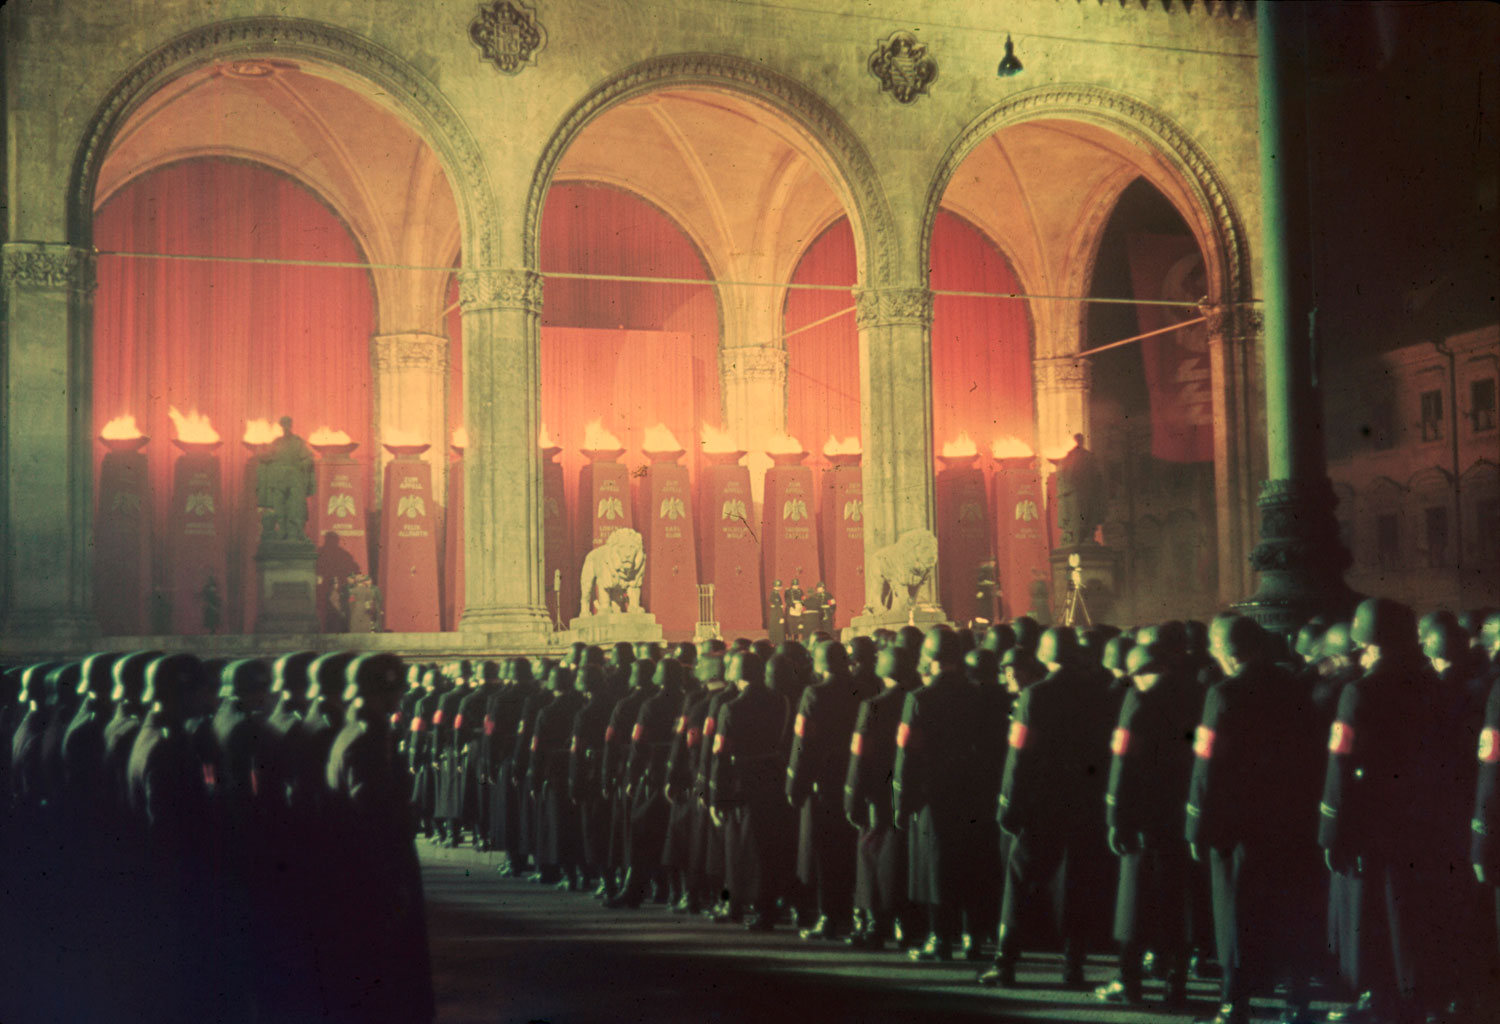 Annual midnight swearing-in of SS troops at Feldherrnhalle, Munich, 1938.